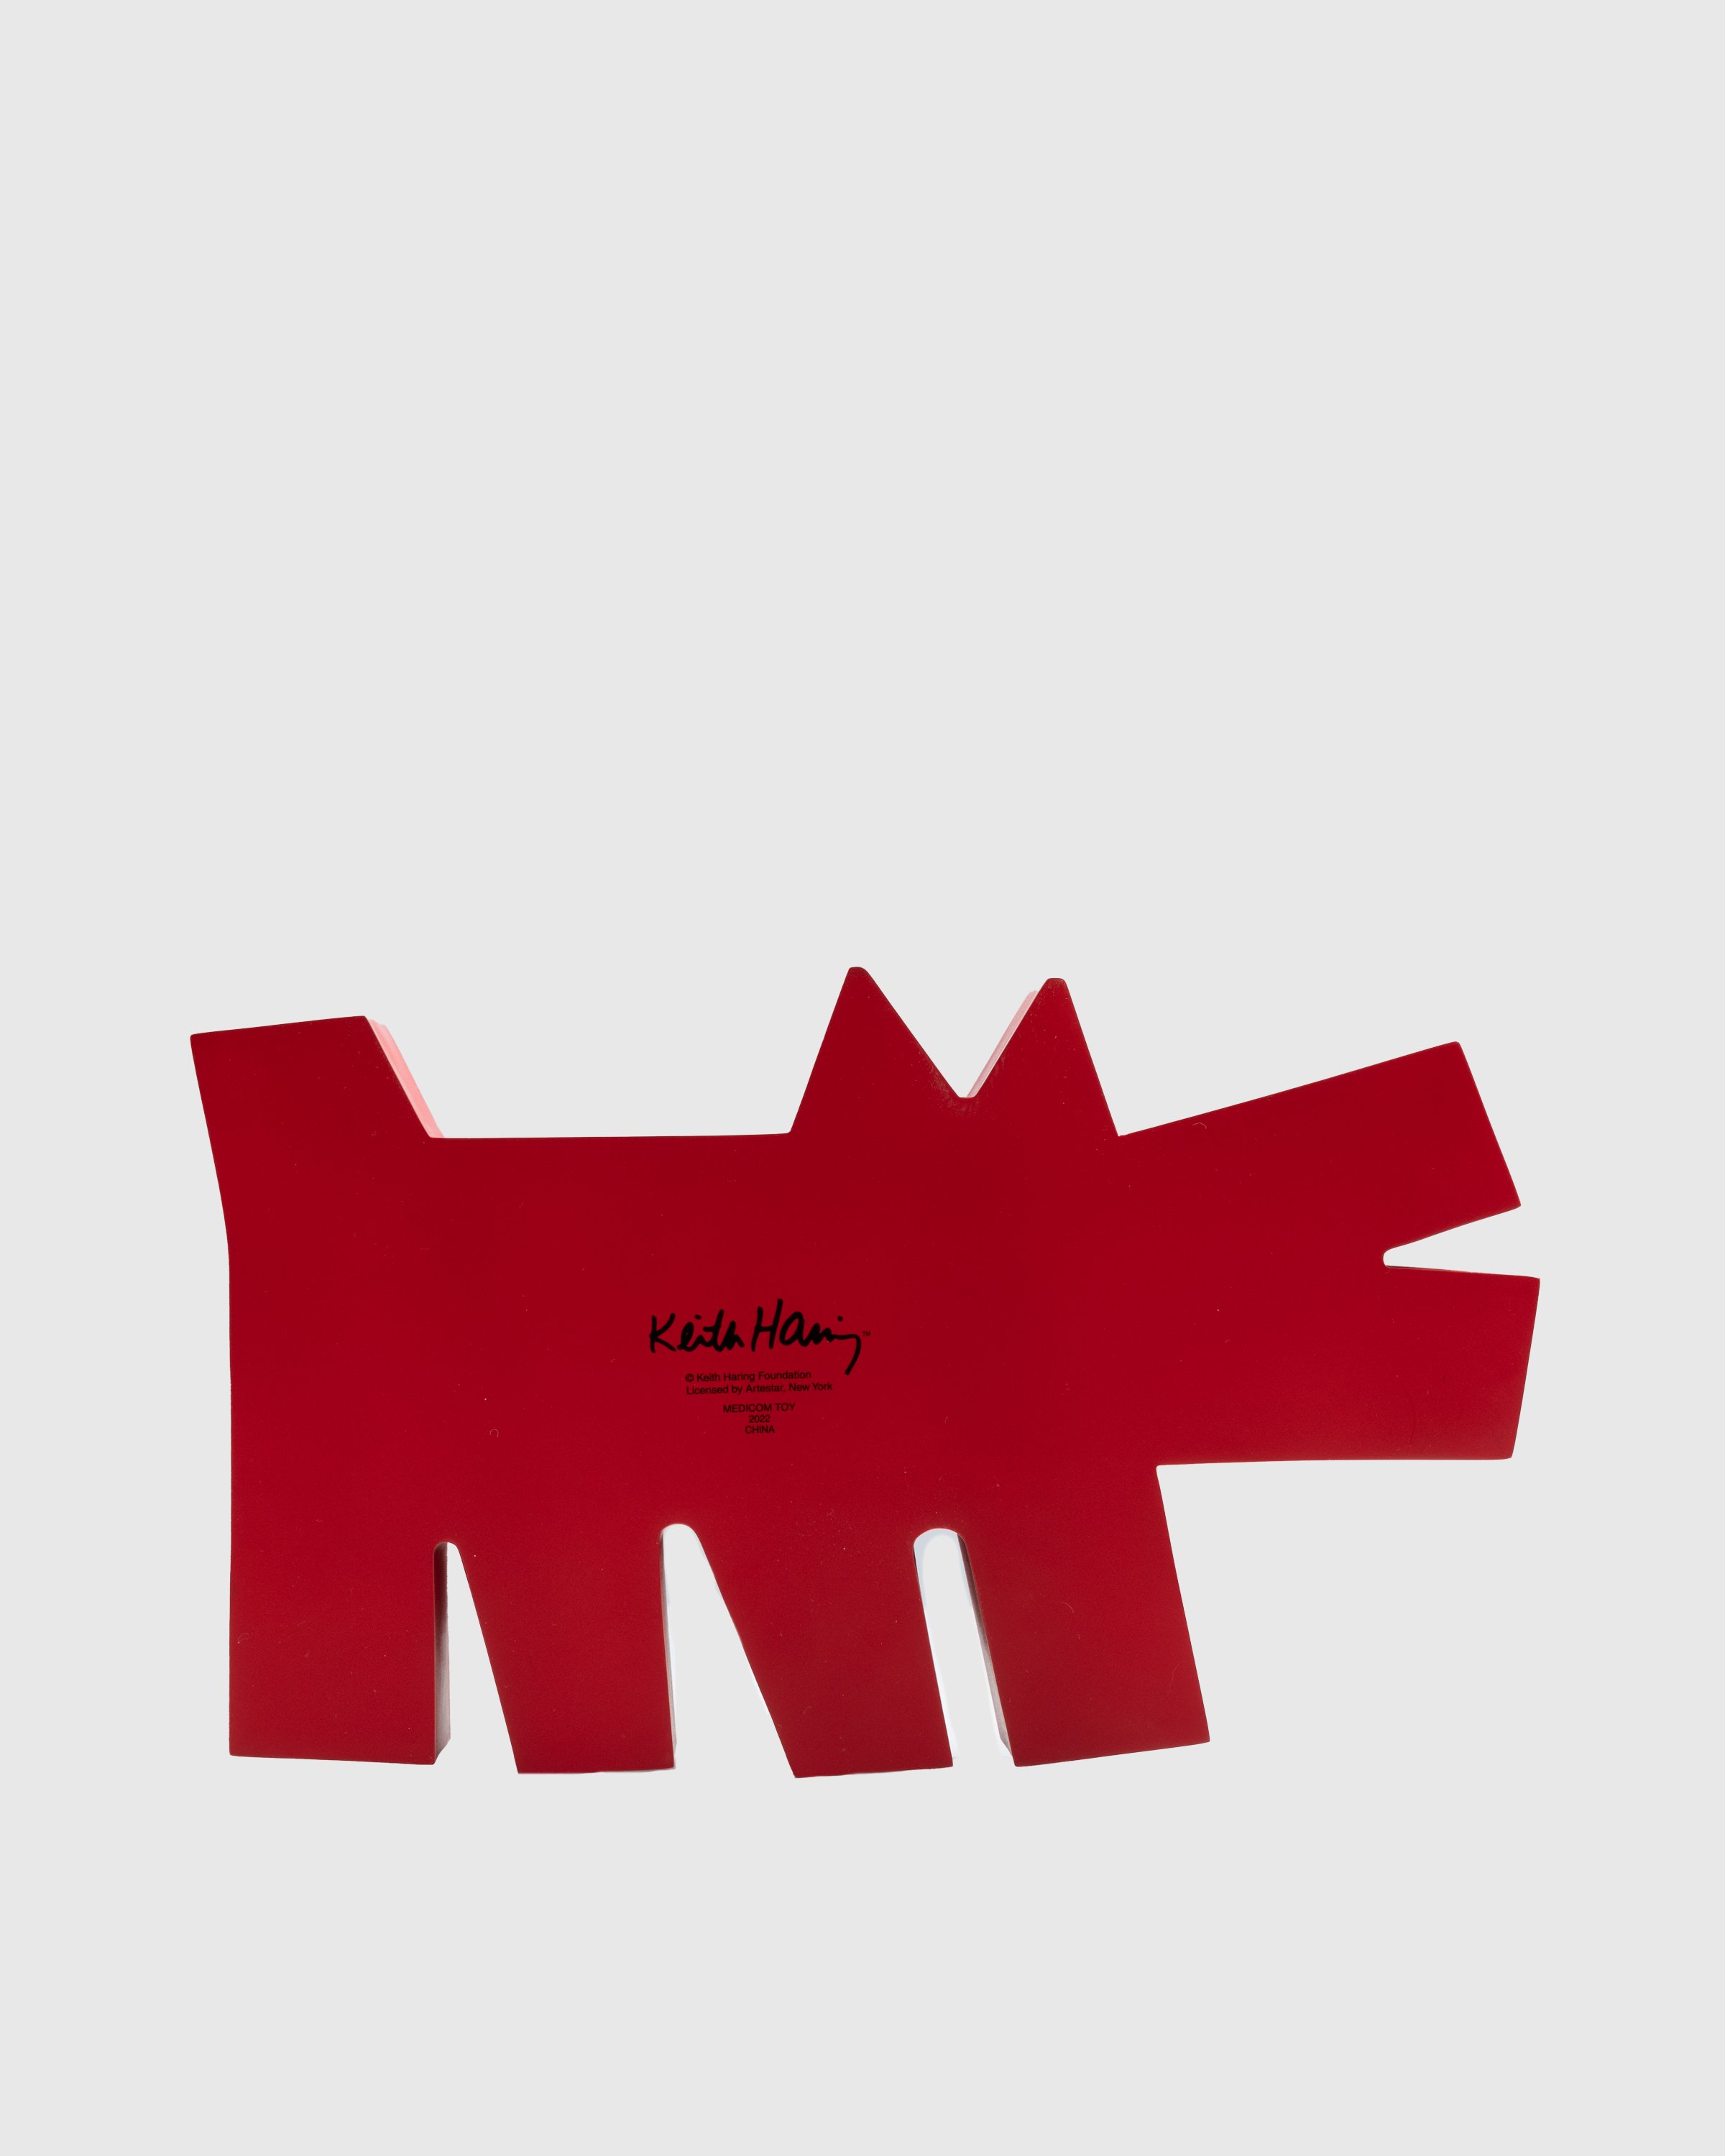 Medicom - Keith Haring Barking Dog Statue Red - Lifestyle - Red - Image 3